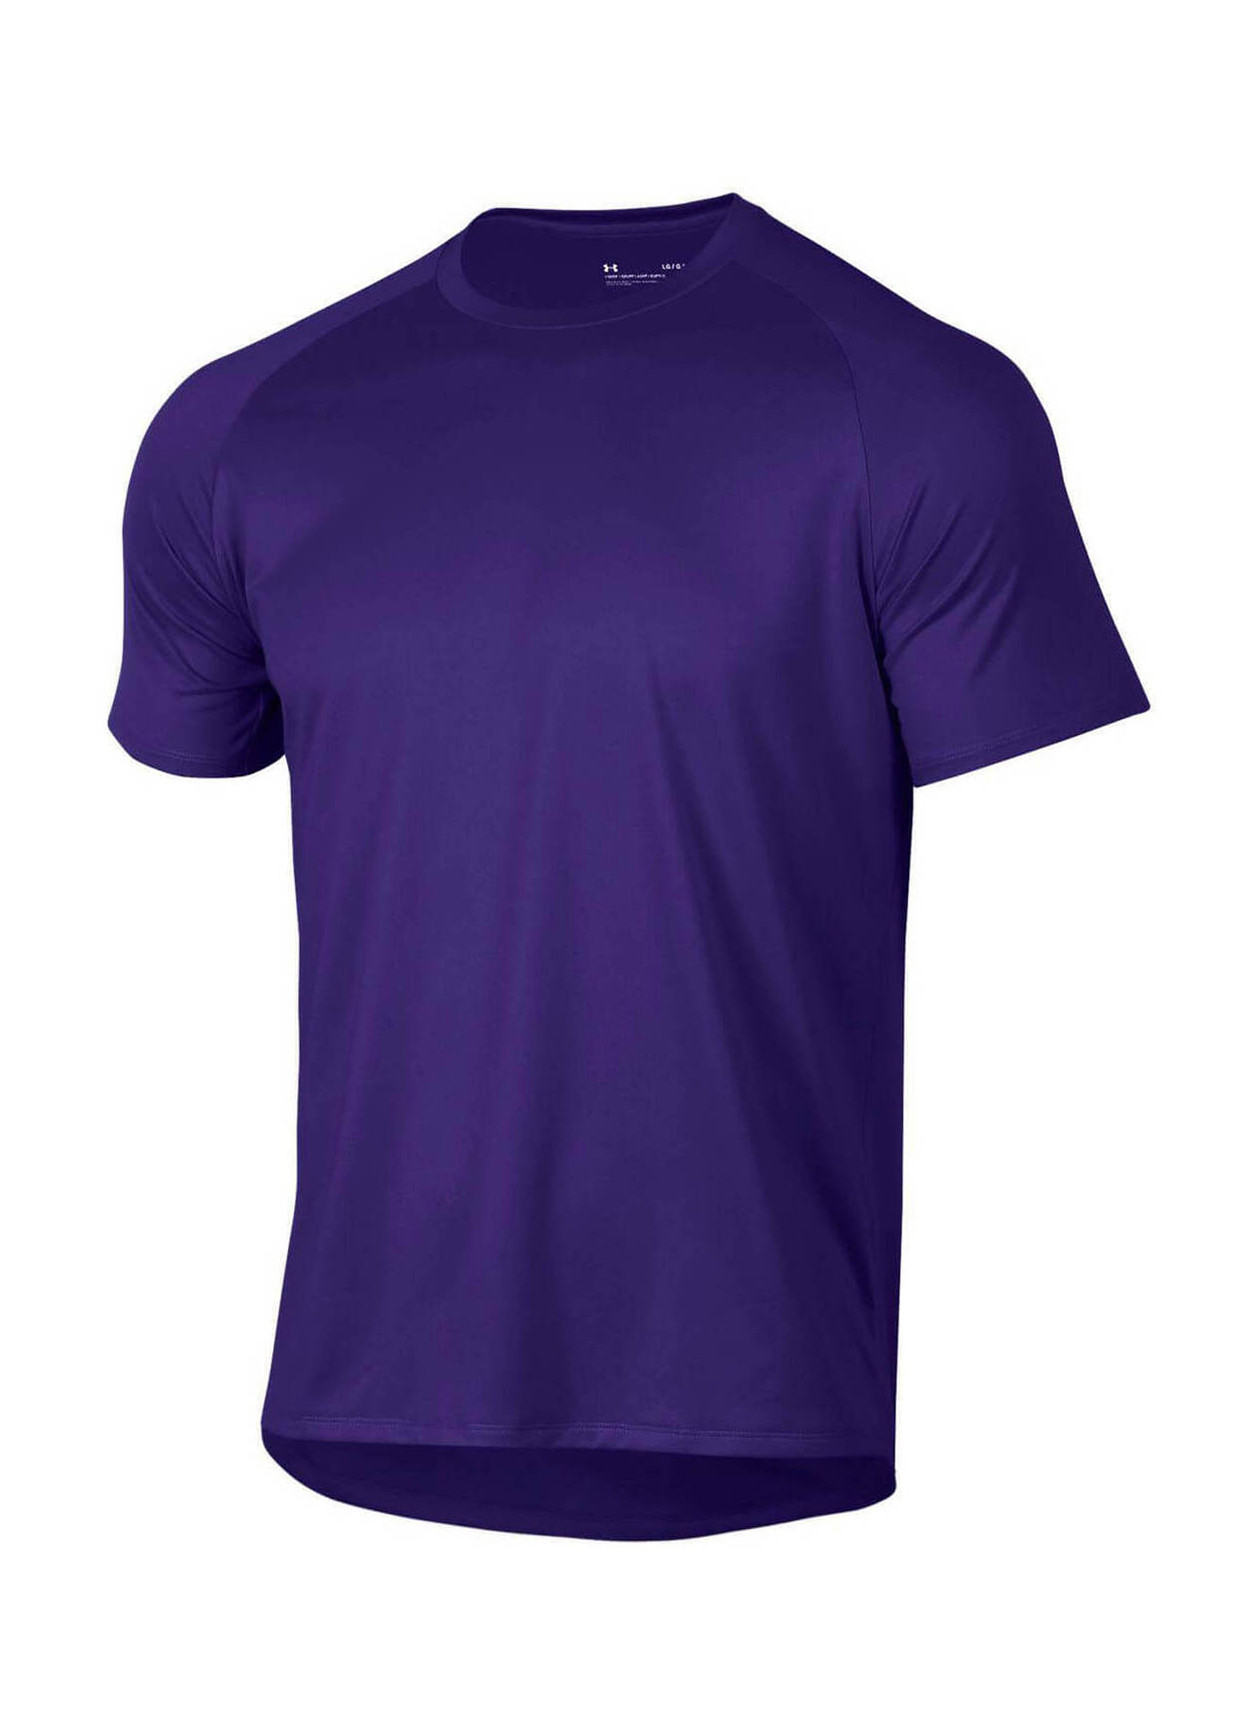 T-shirts Under Armour